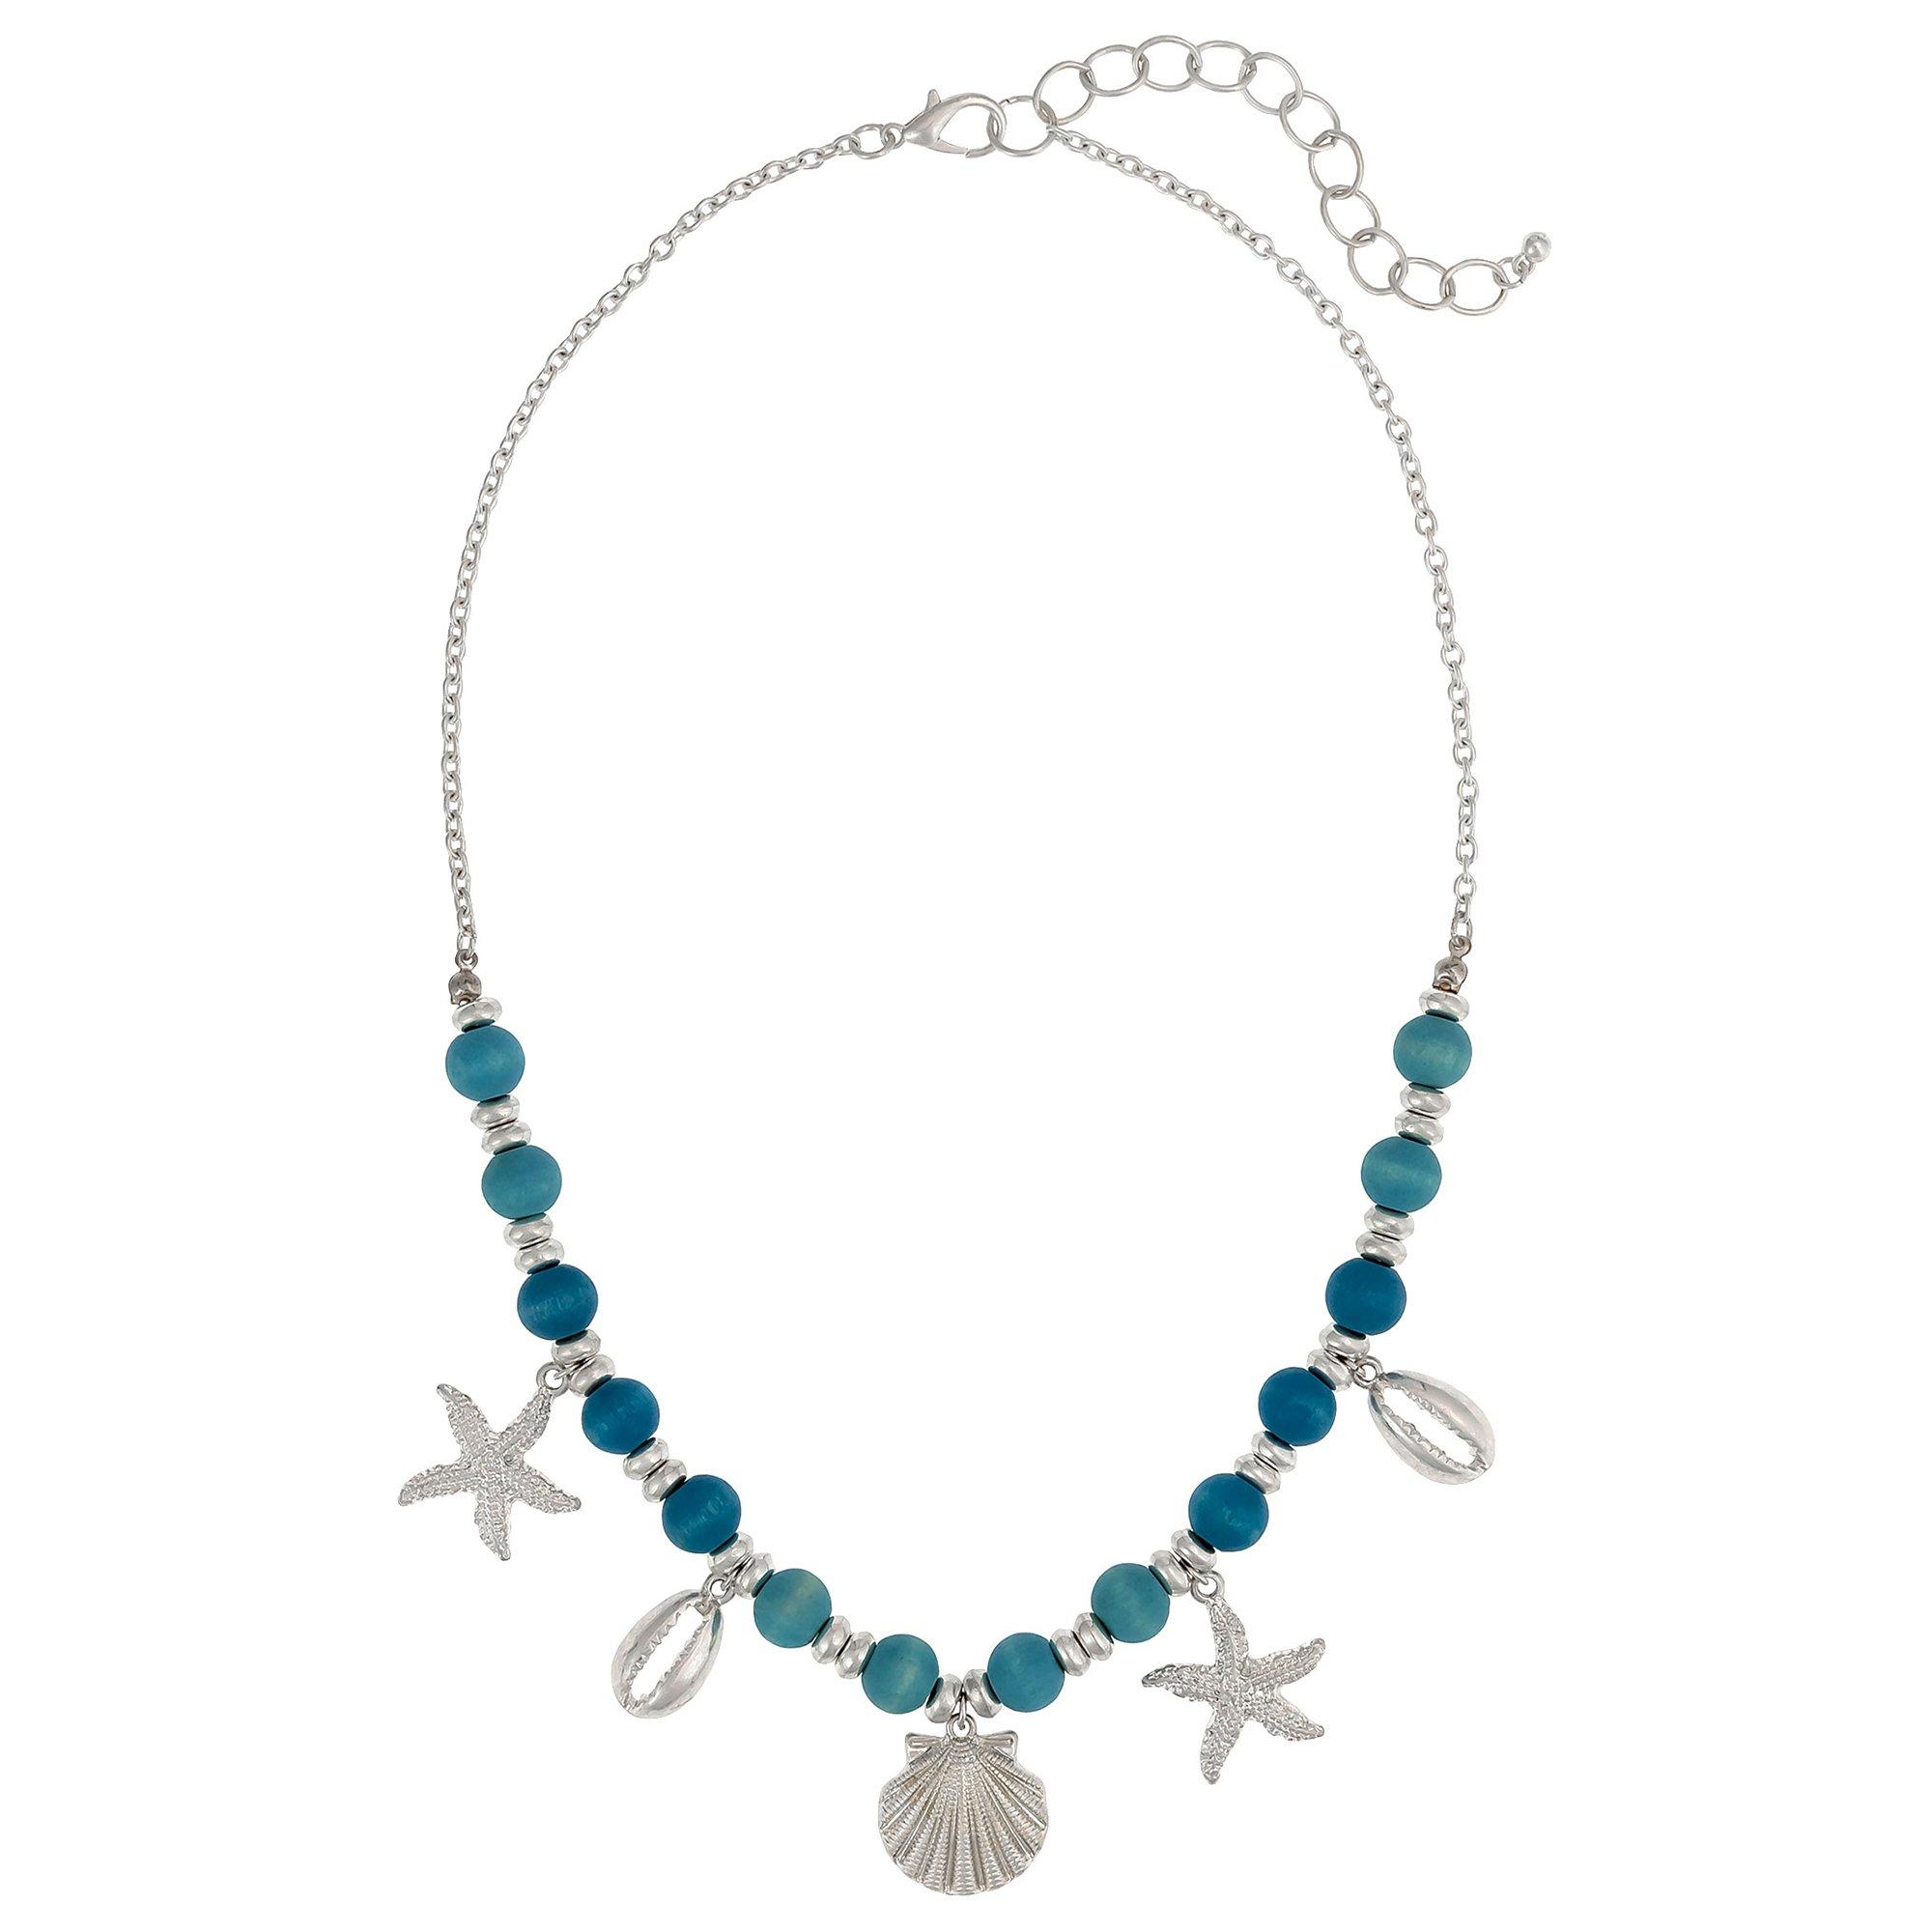 19 In. Beaded Chain & Charms Necklace